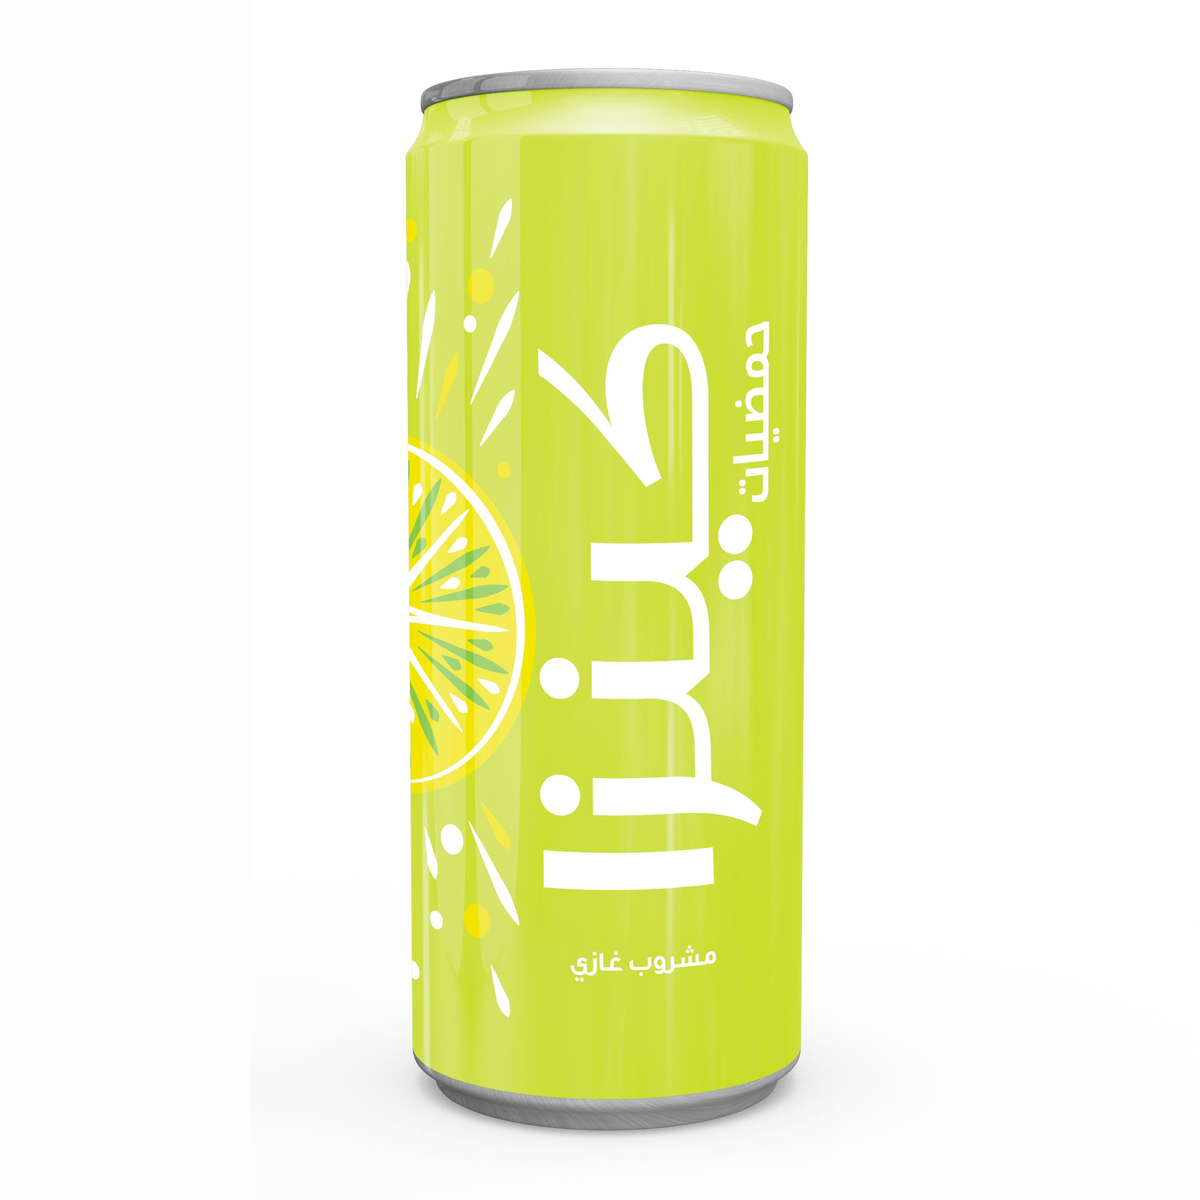 Kinza Carbonated Drink Citrus 250 ml